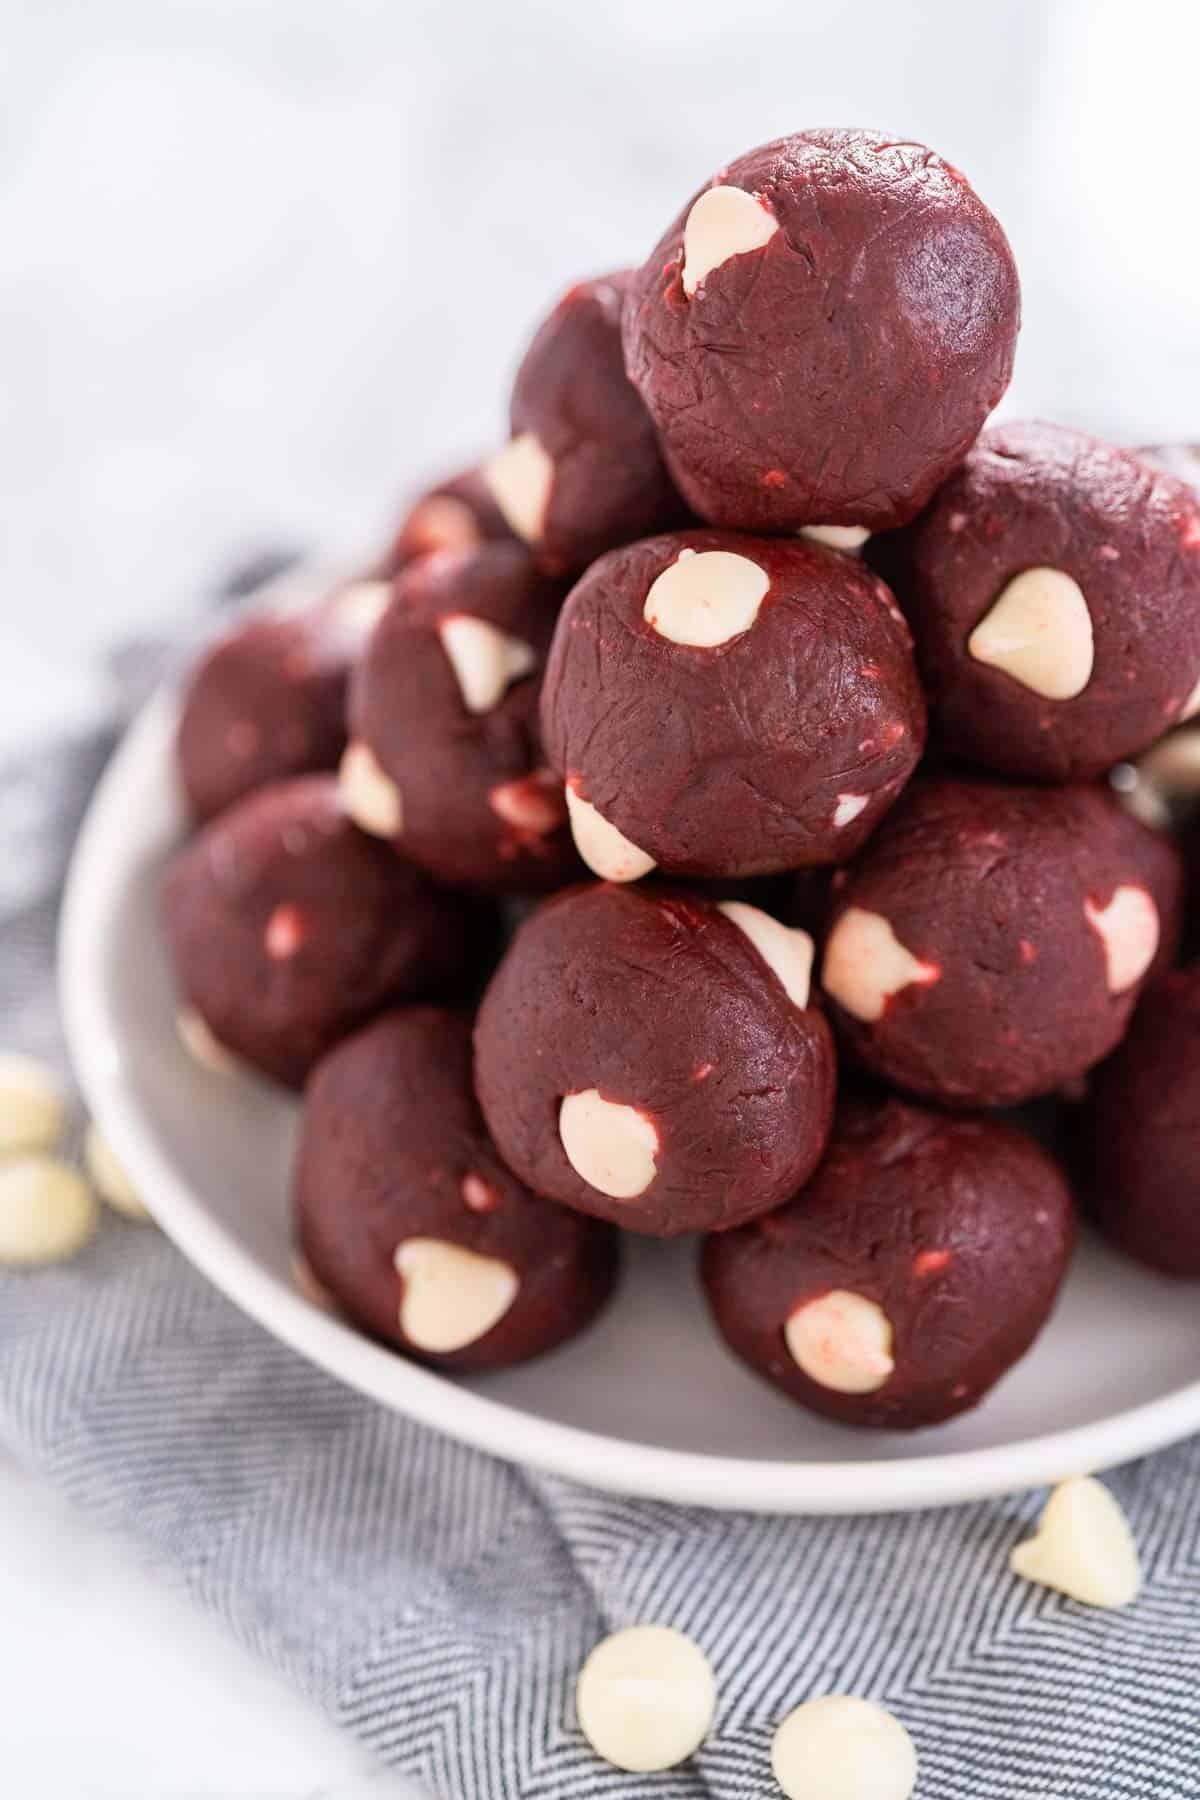 A pile of red velvet cookie dough bites on a white plate.